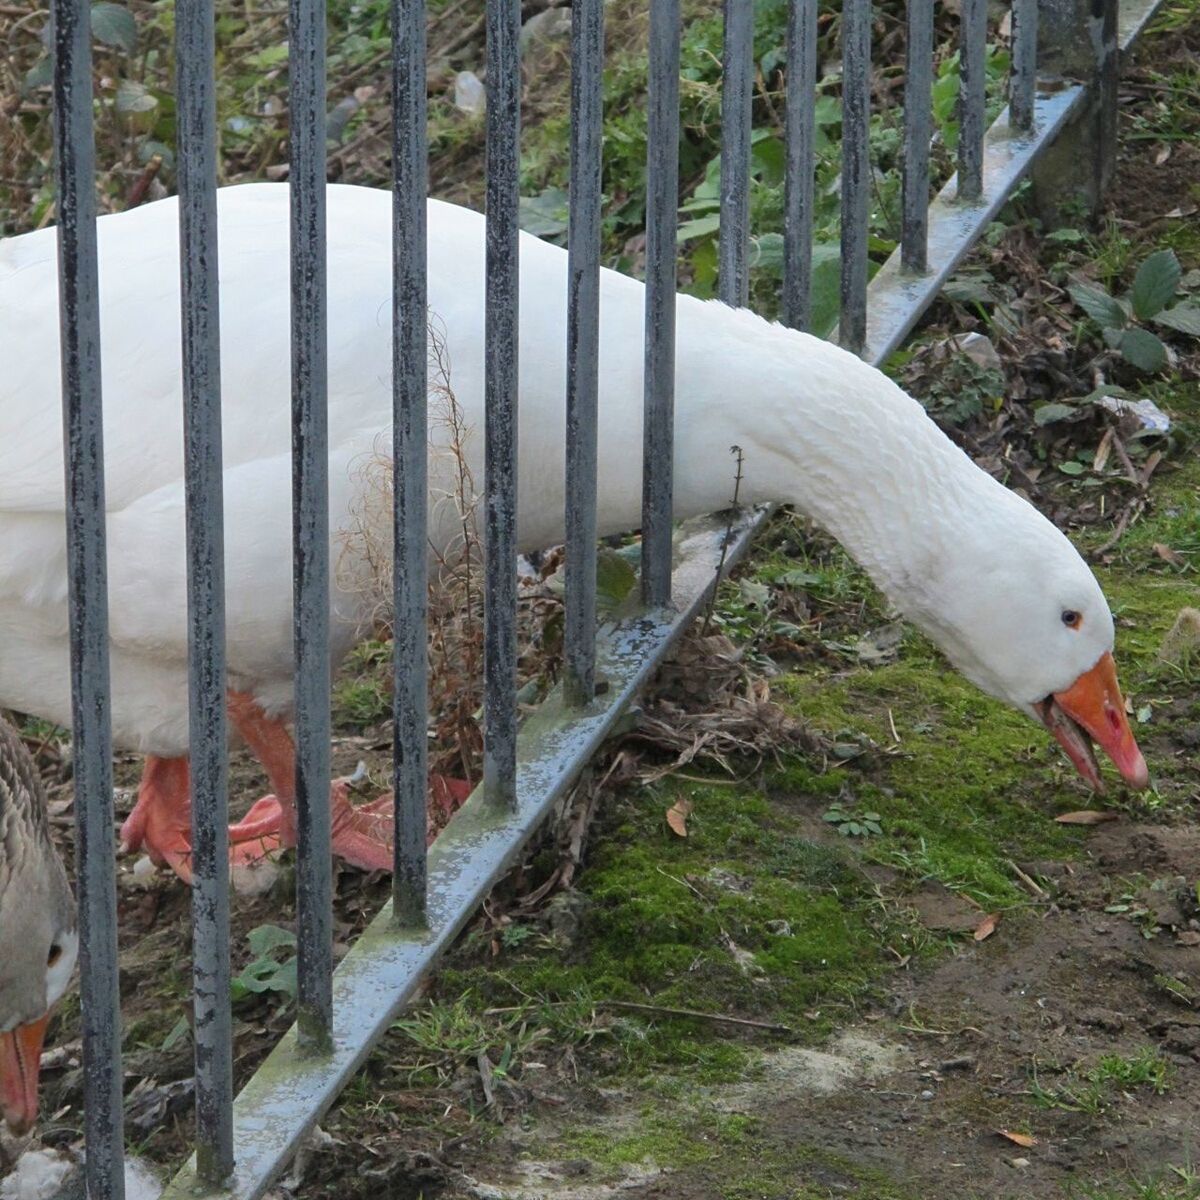 DUCK IN CAGE AT ZOO